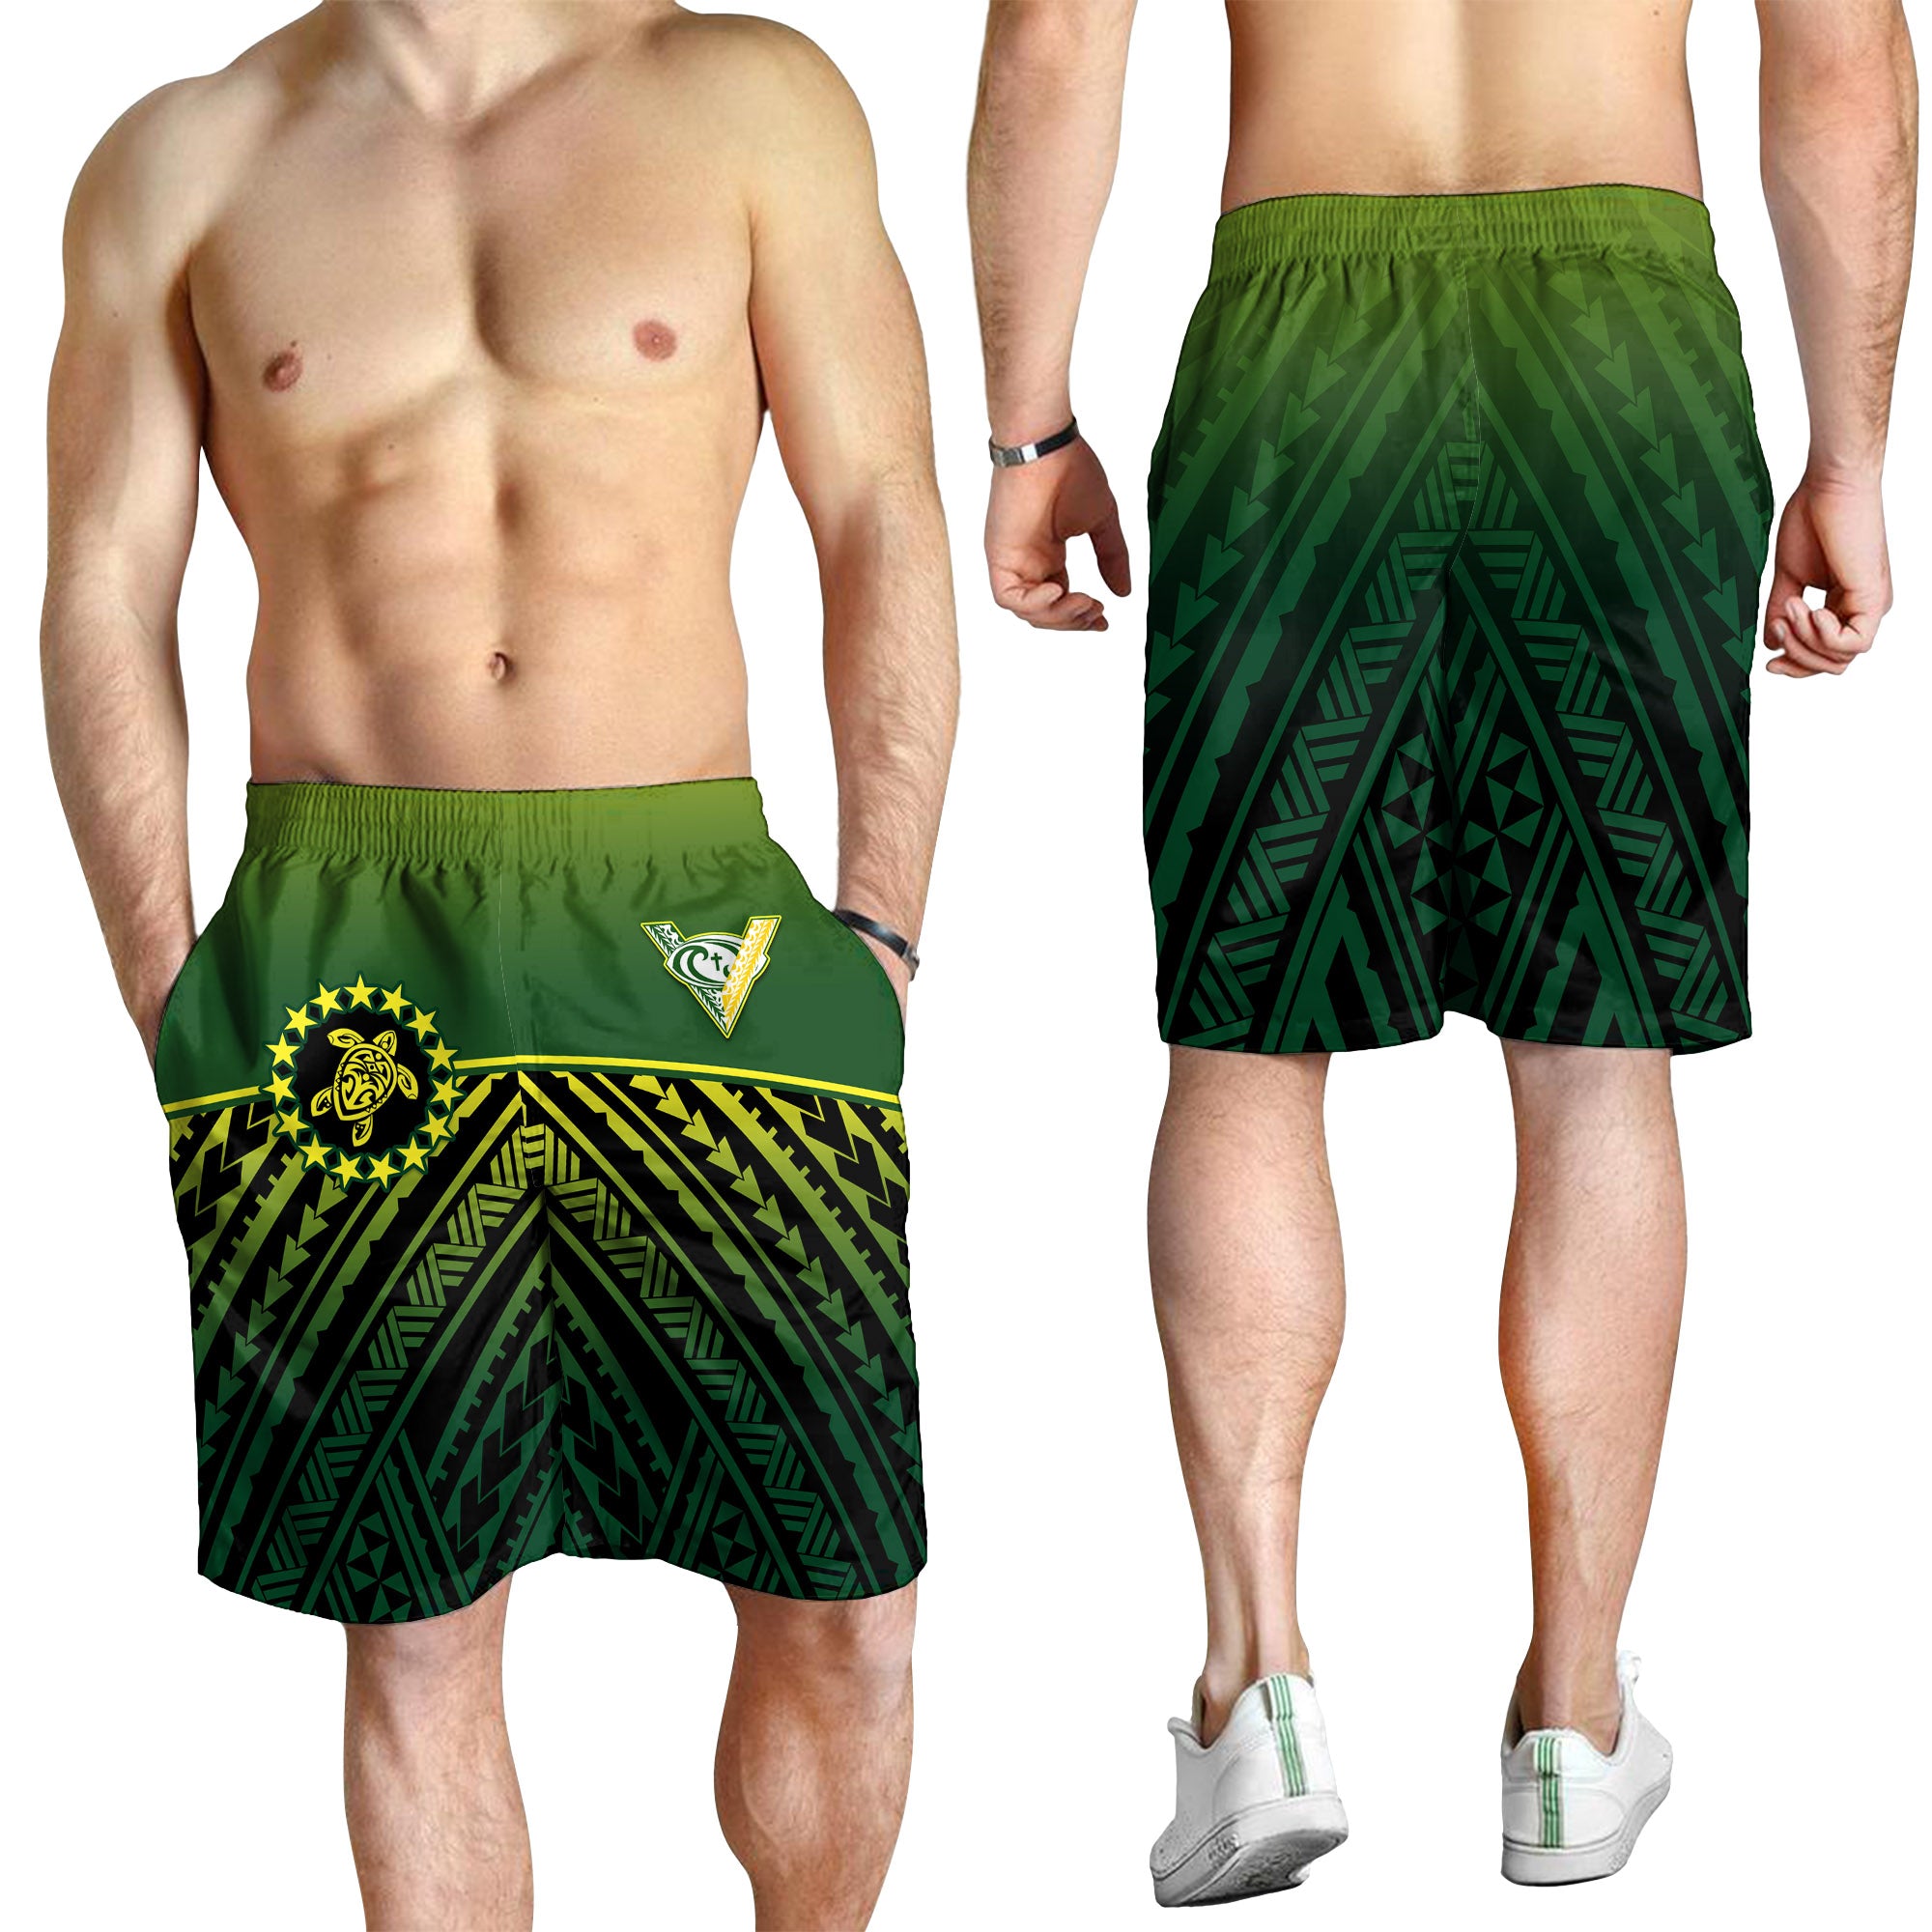 The Kuki's Men Shorts Cook Islands Rugby LT13 Green - Polynesian Pride